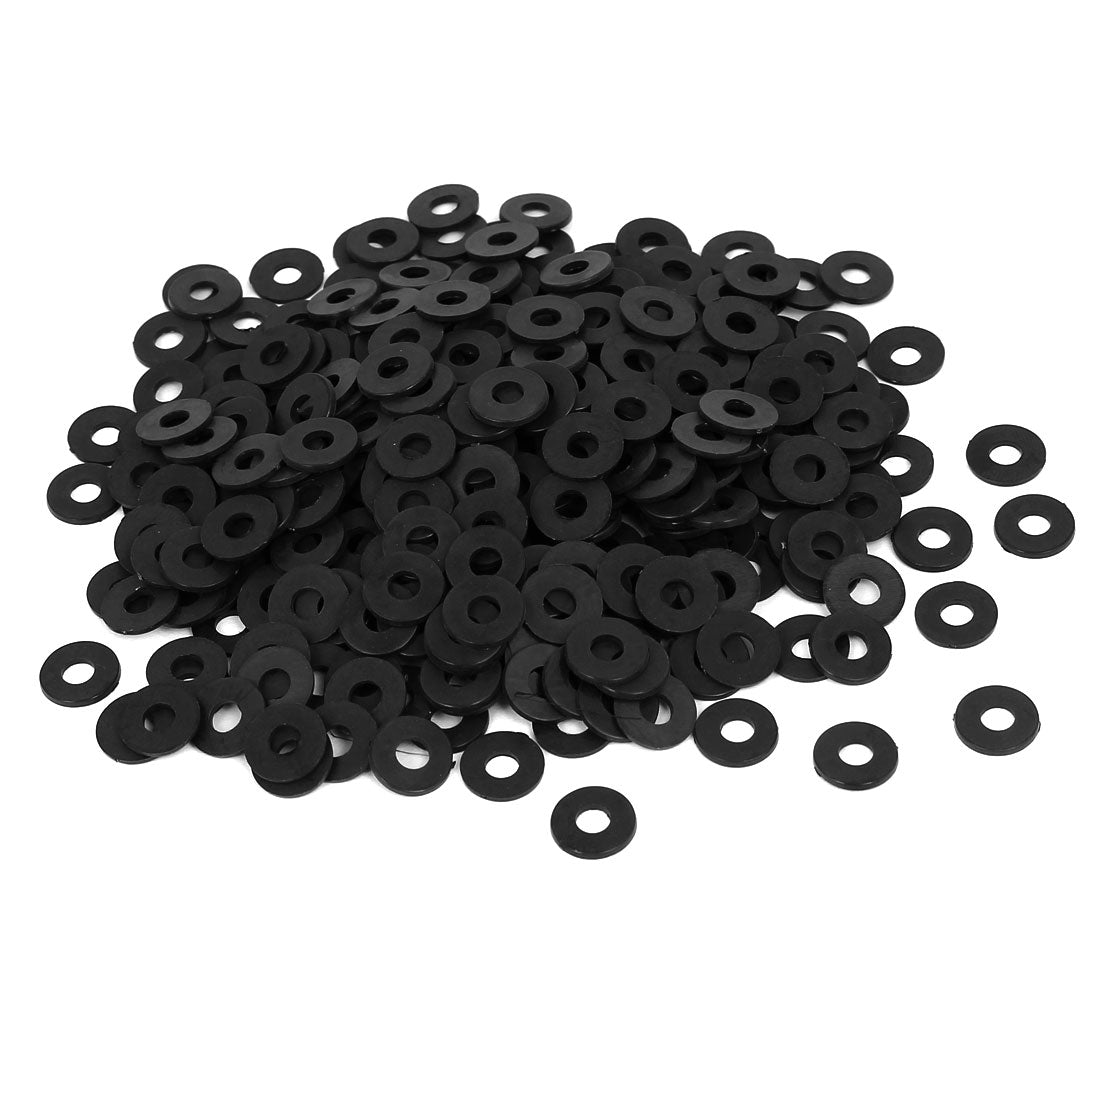 uxcell Uxcell Nylon Flat Insulating Washers Gaskets Spacers Black Packs